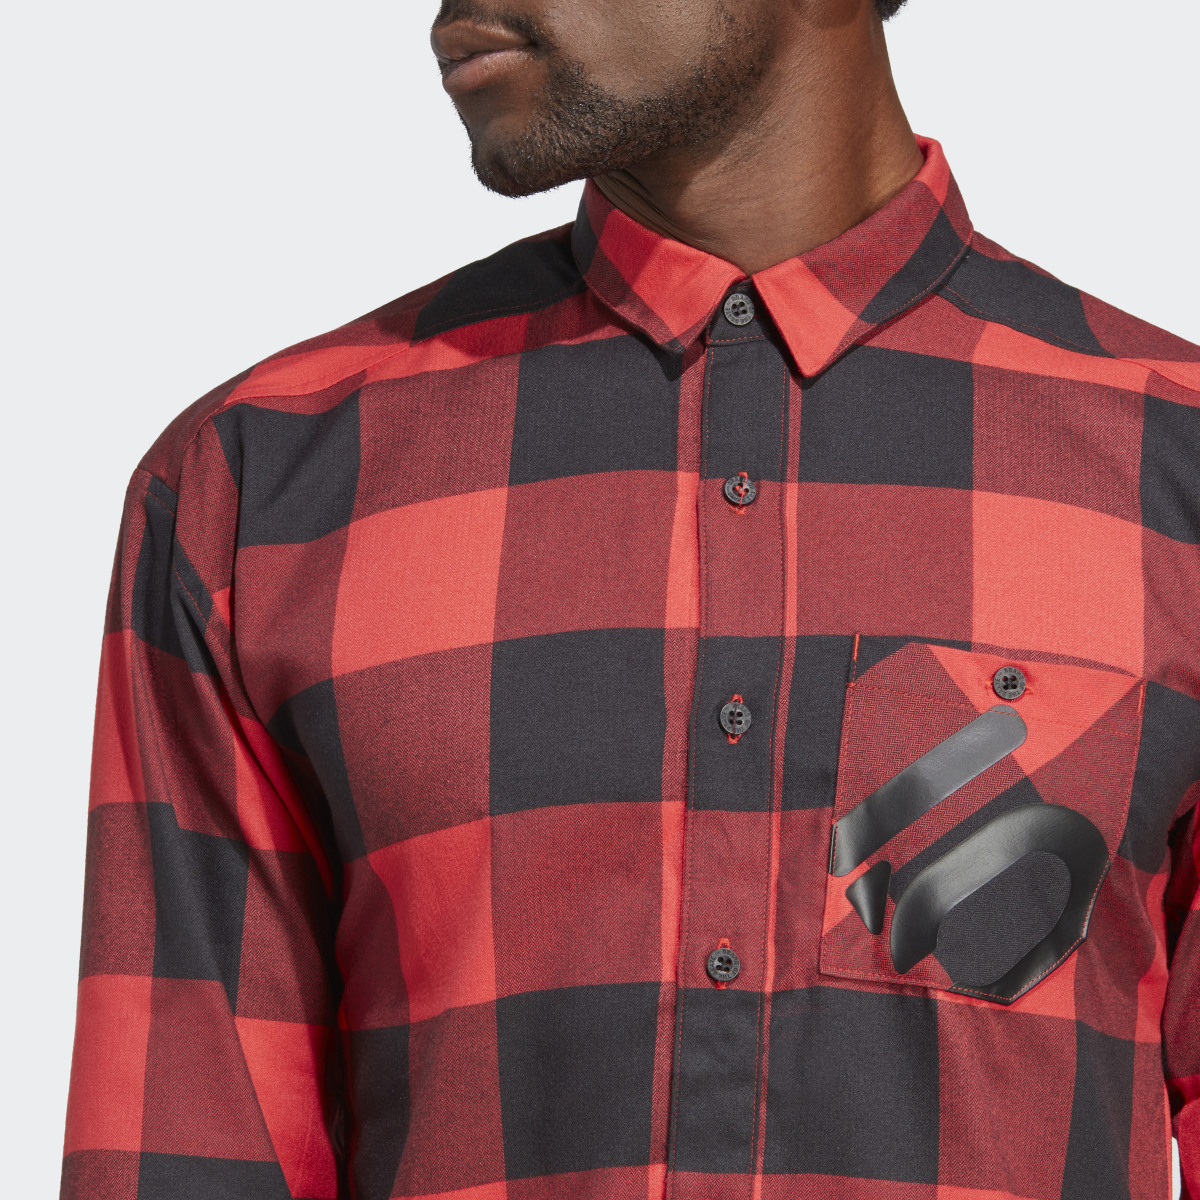 Adidas Five Ten Brand of the Brave Flannel Shirt (uniseks). 5